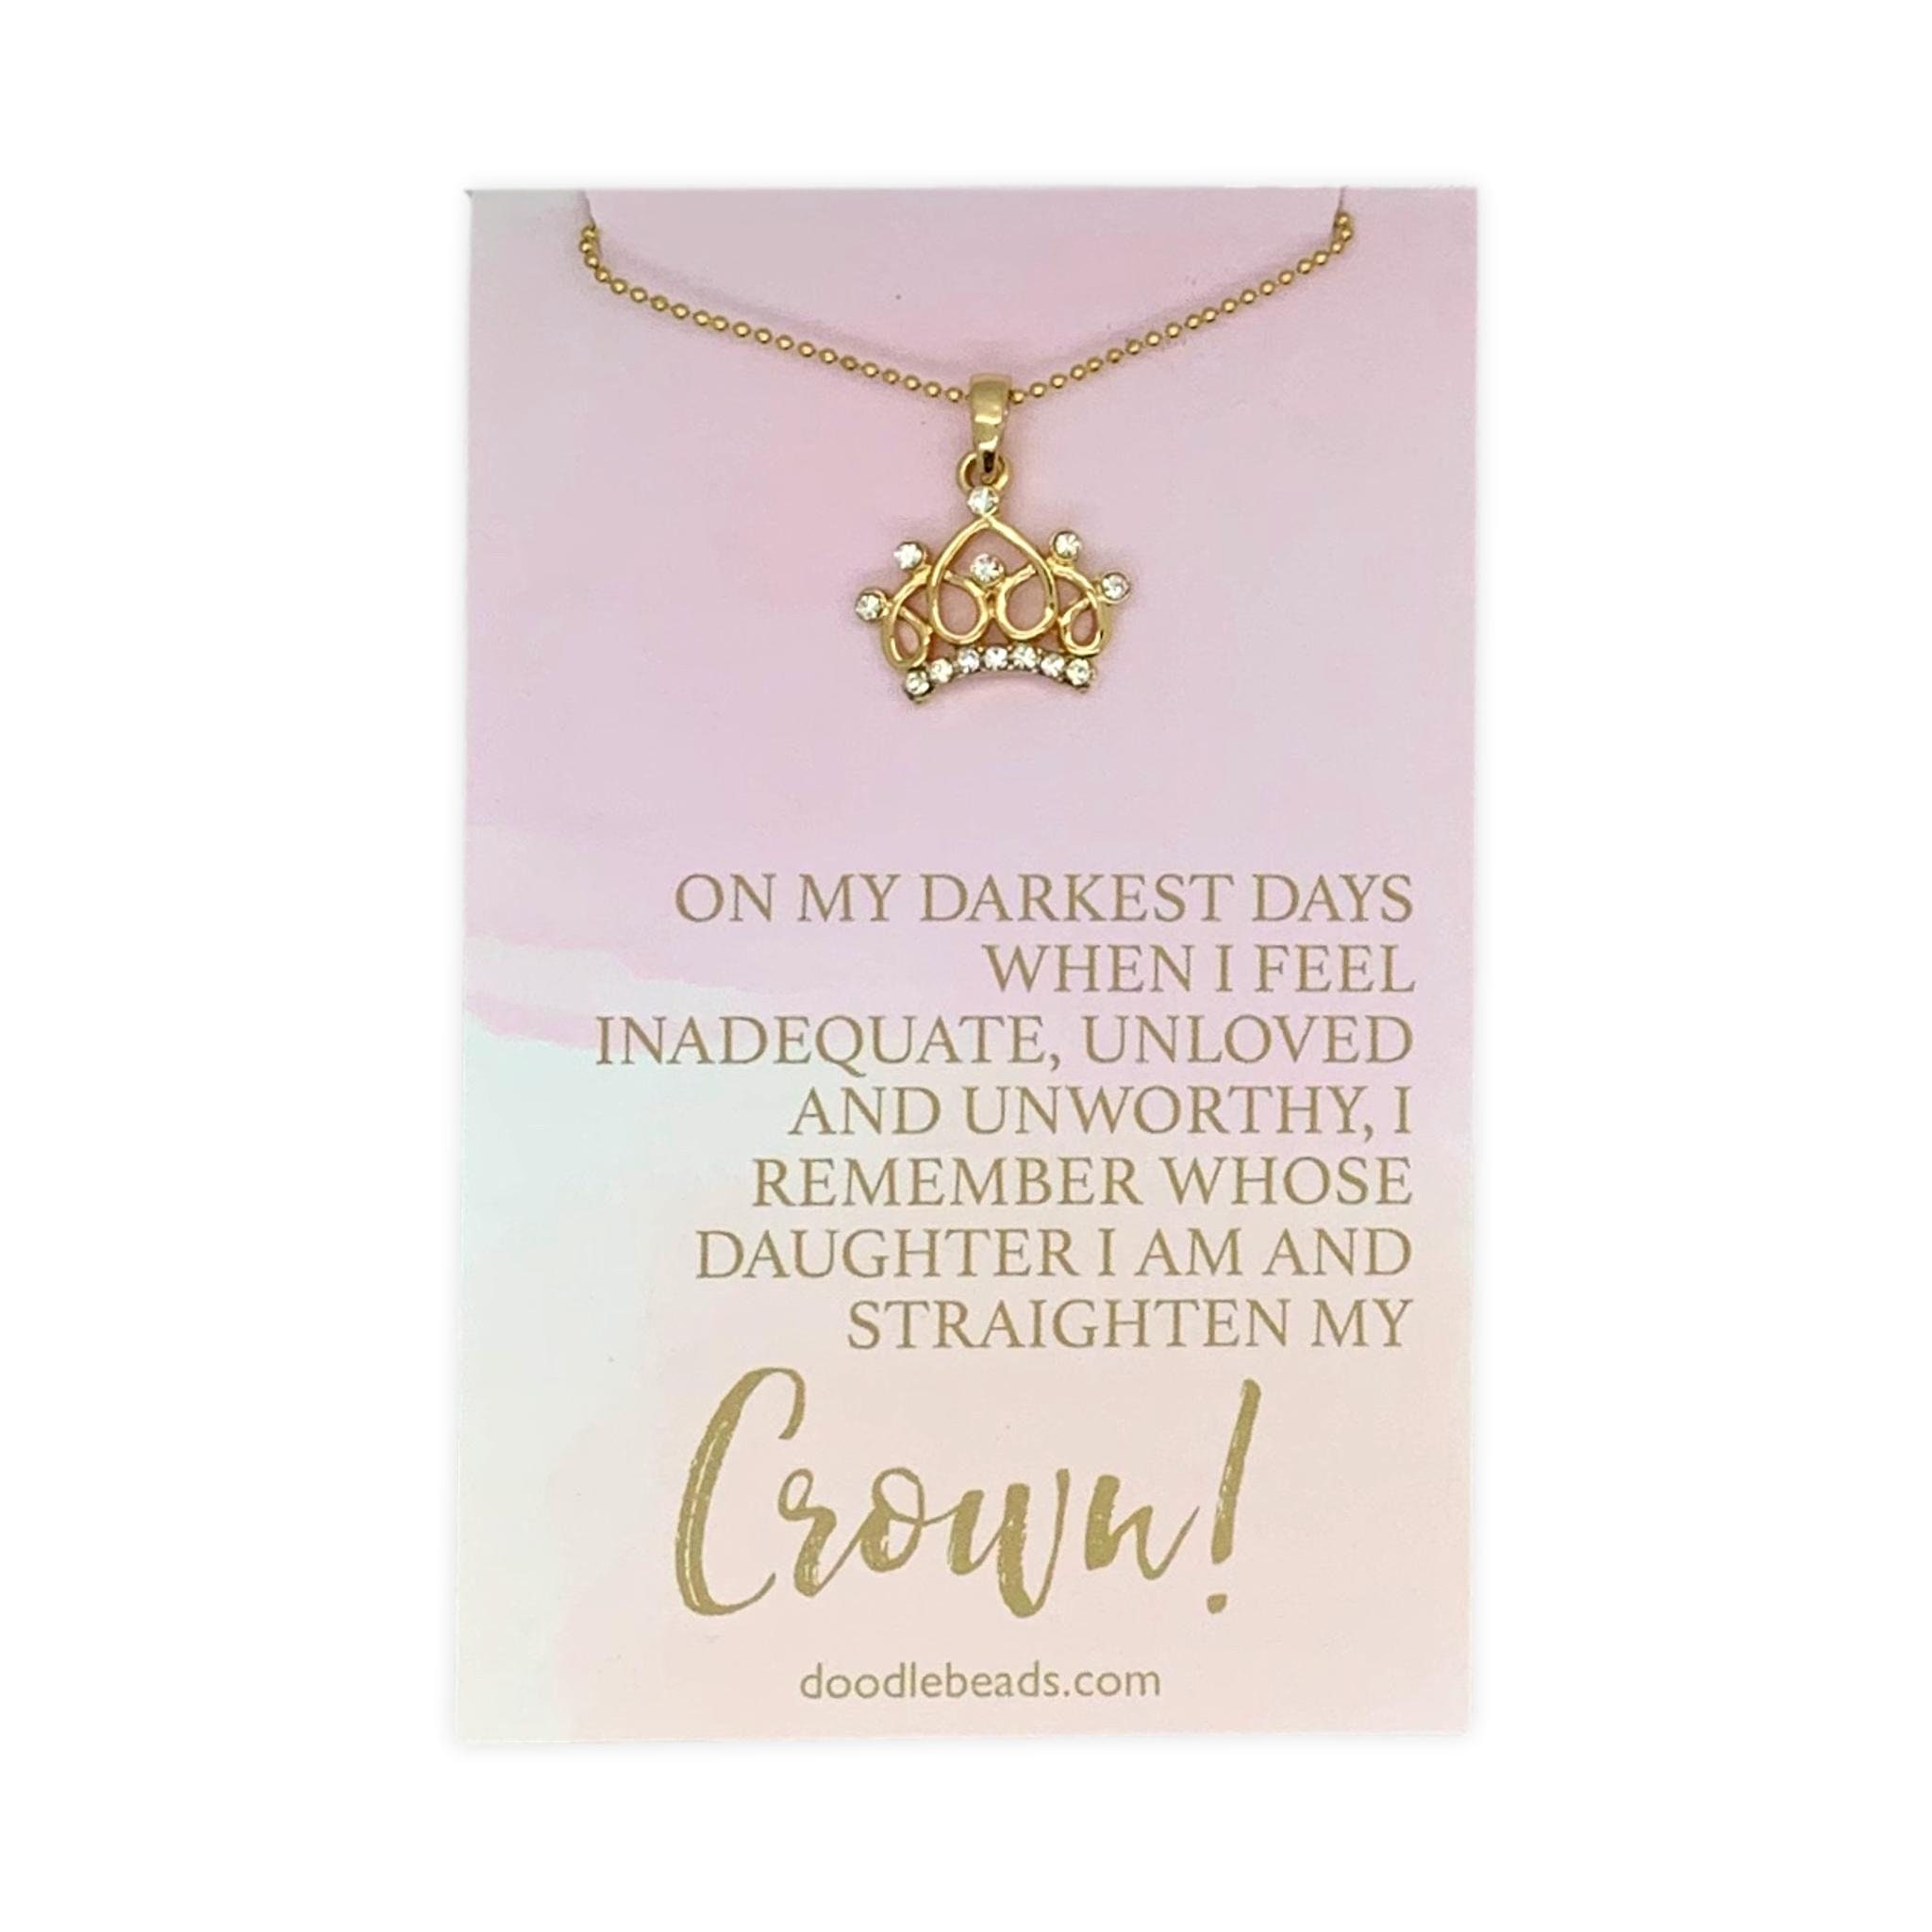 Gift for Girlfriend Gifts Luxe Crown Necklace Girlfriend Birthday Gifts from Boyfriend Valentine's Day Necklace Encouragement Gifts for Girlfriend